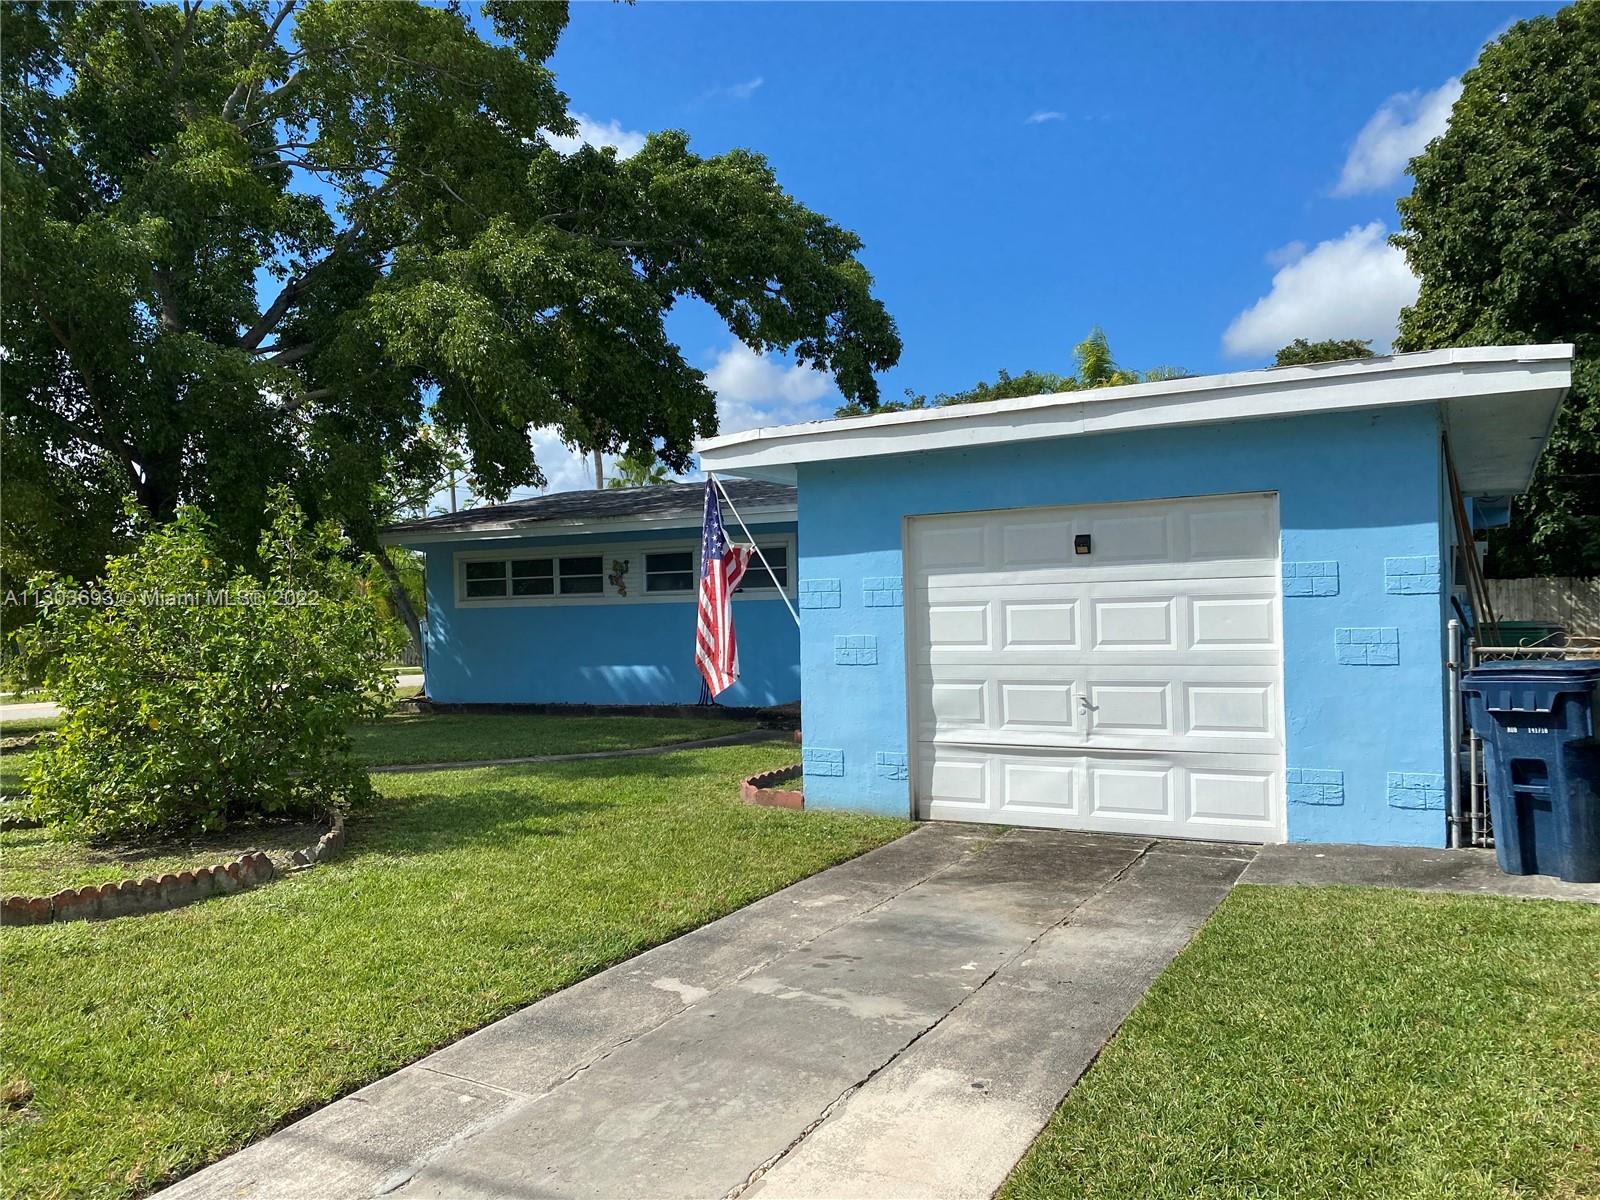 *** NICE COMBINATION OF 4 BEDROOM 2 BATH AND SWIMMING POOL ON LARGE CORNER LOT - ROOM FOR THE BOAT AND MUCH MORE *** GARAGE WAS CONVERTED TO BEDROOM/OFFICE THAT CAN EASILY BE CHANGED BACK *** ROOF IS 2018, KITCHEN UPDATED AND REAL FIREPLACE - OUTSIDE FEATURES COVERED PATIO OVERLOOKING THE POOL *** LOCATED IN RECENTLY INCORPORATED CUTLER BAY CLOSE TO SHOPPING, GOVERNMENT CENTER, CUTLER BAY HIGH SCHOOL, AND POPULAR BLACK POINT MARINA ***